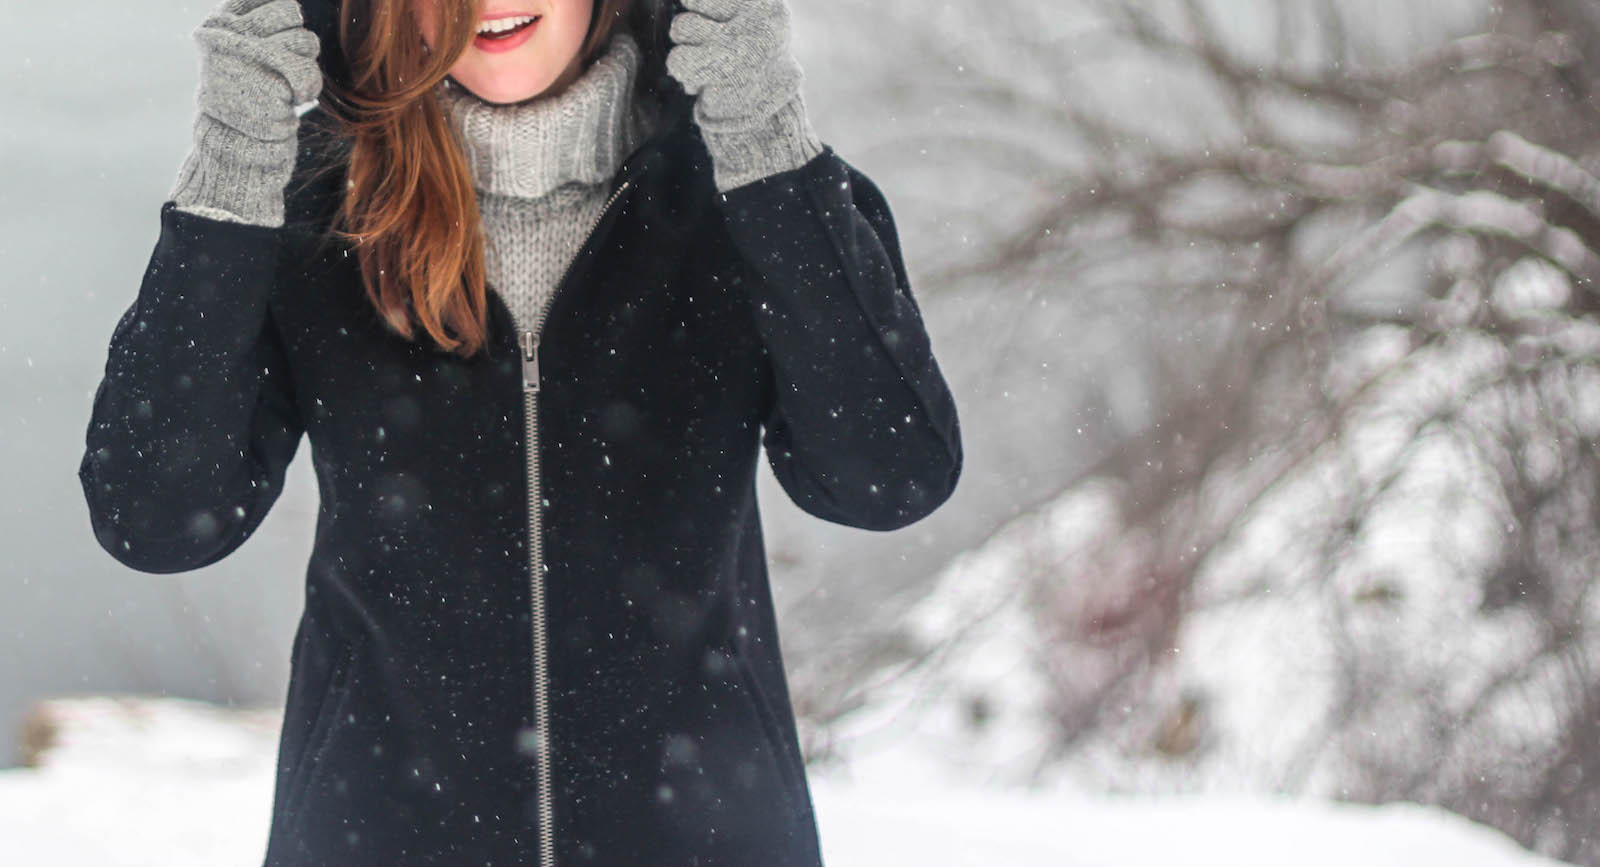 How to clean and care for your winter coats